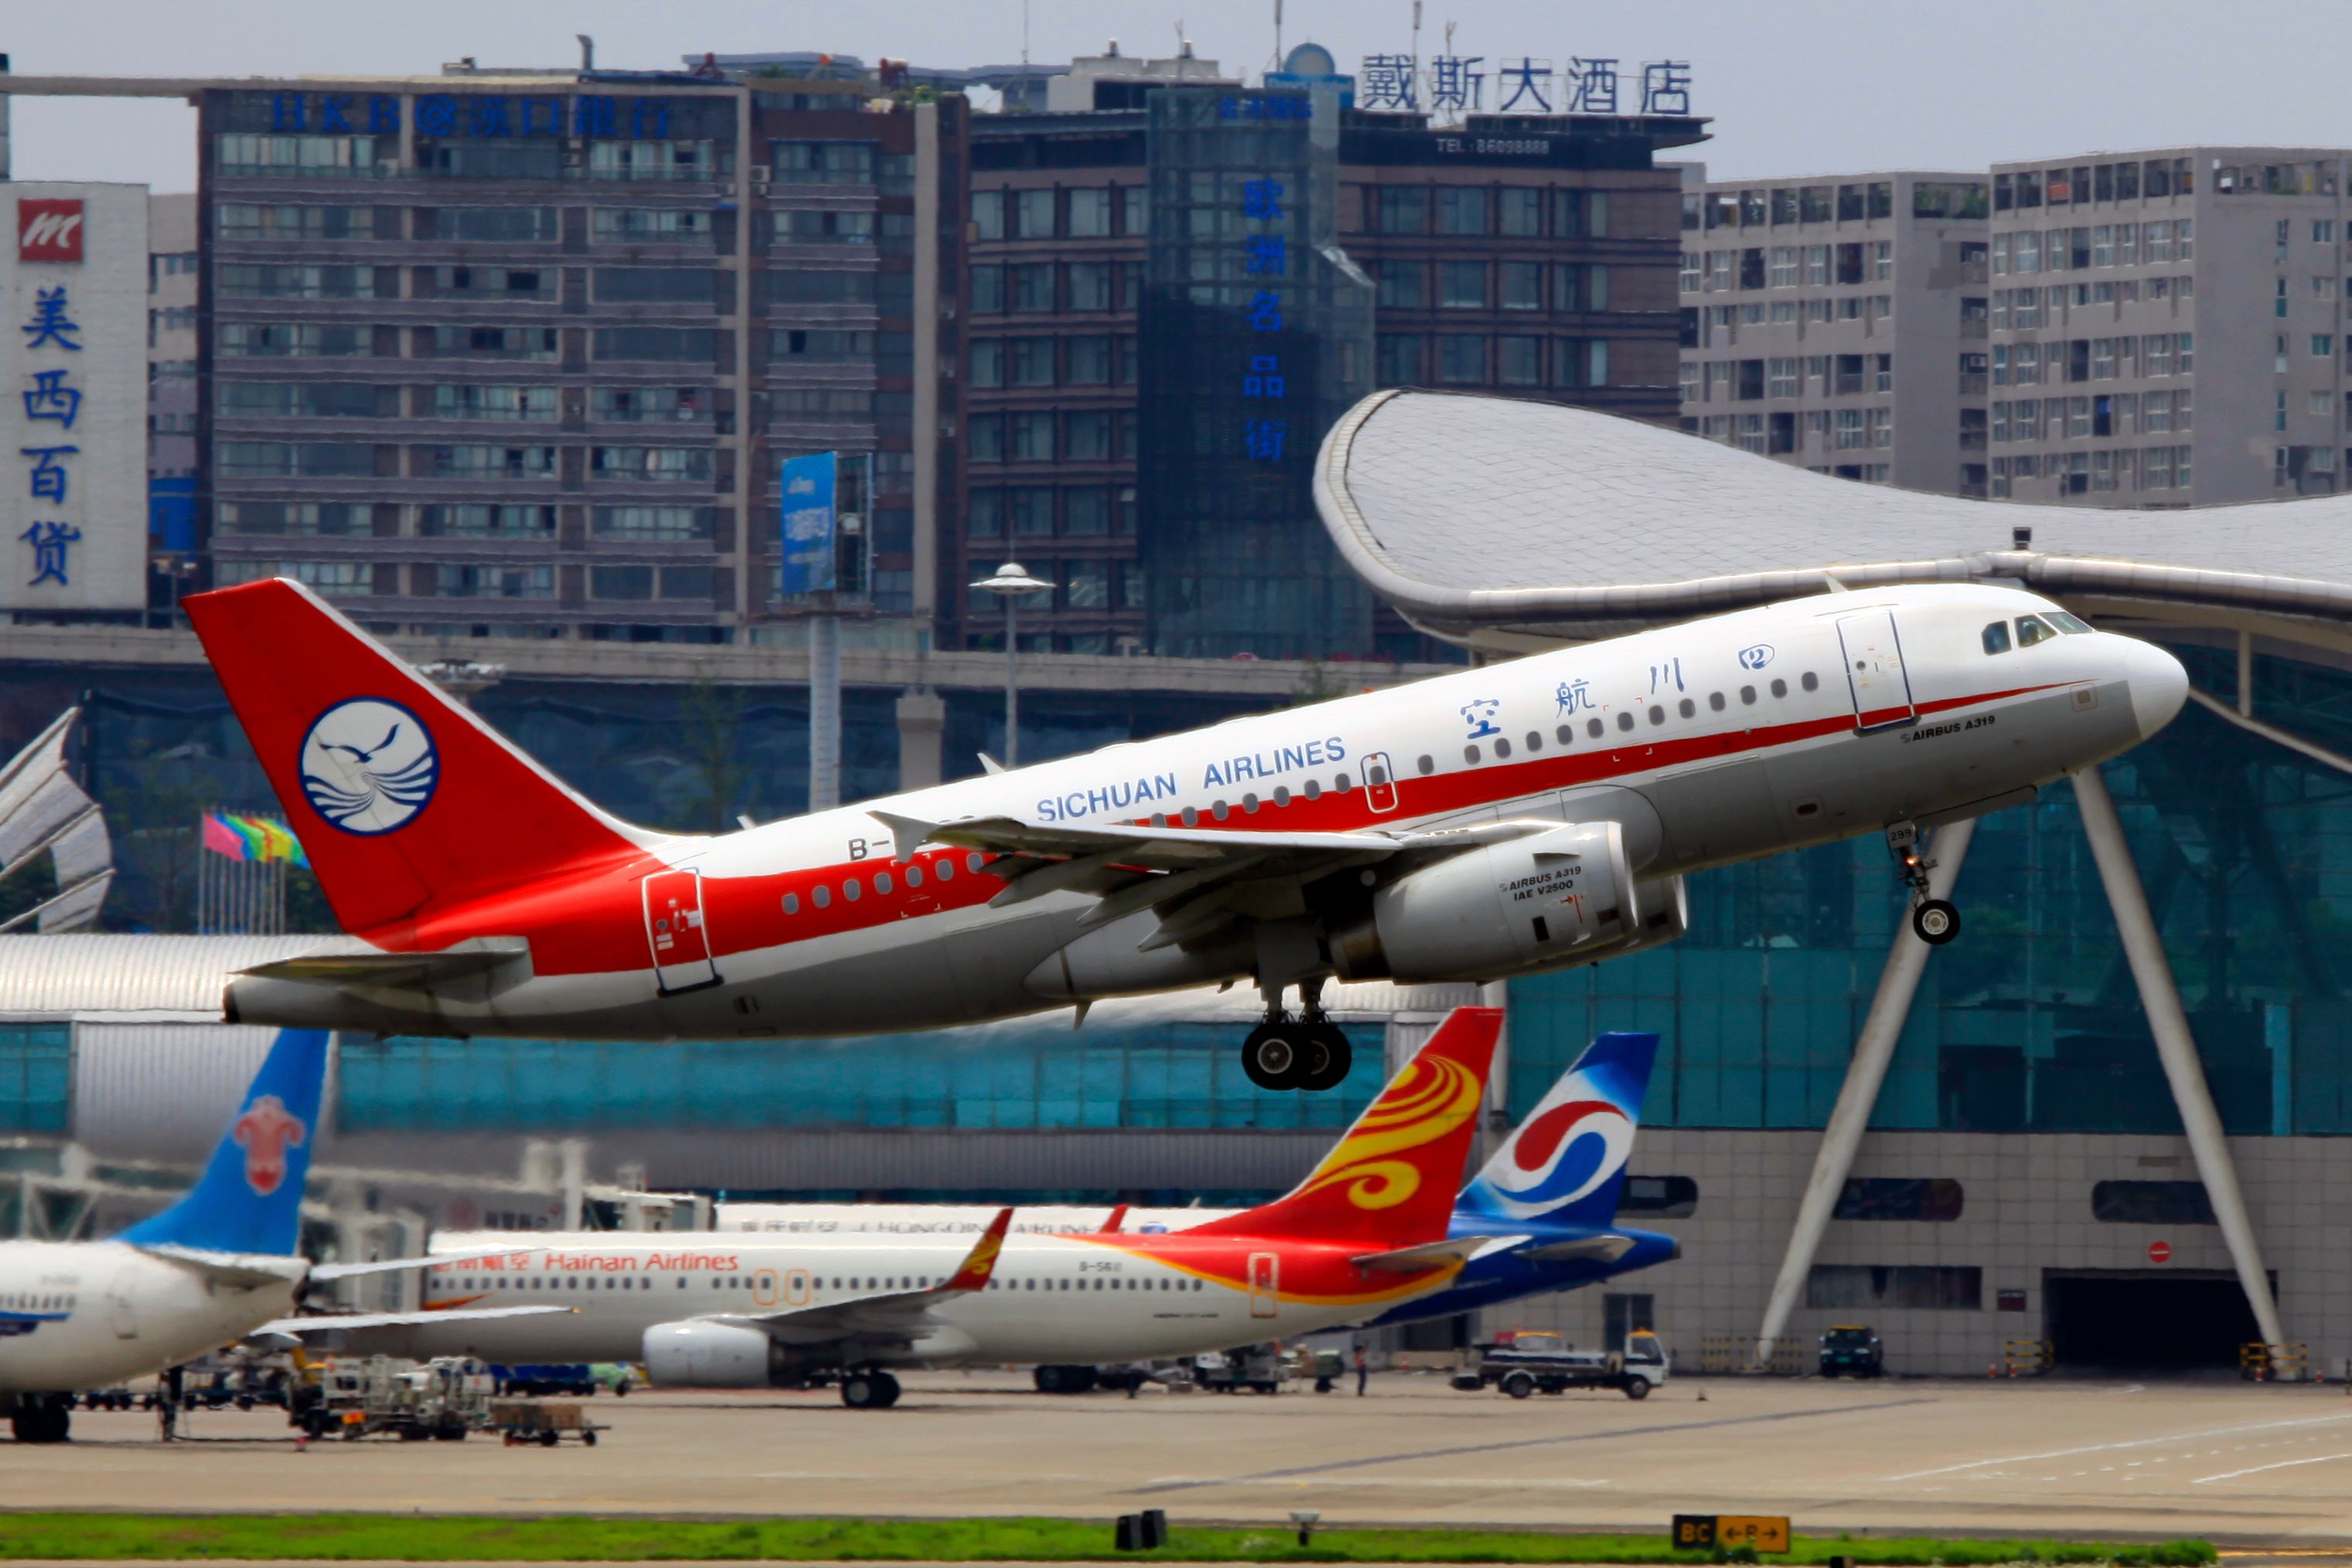 A Sichuan Airlines Airbus A319-133 taking off from Chongqing Jiangbei International Airport.